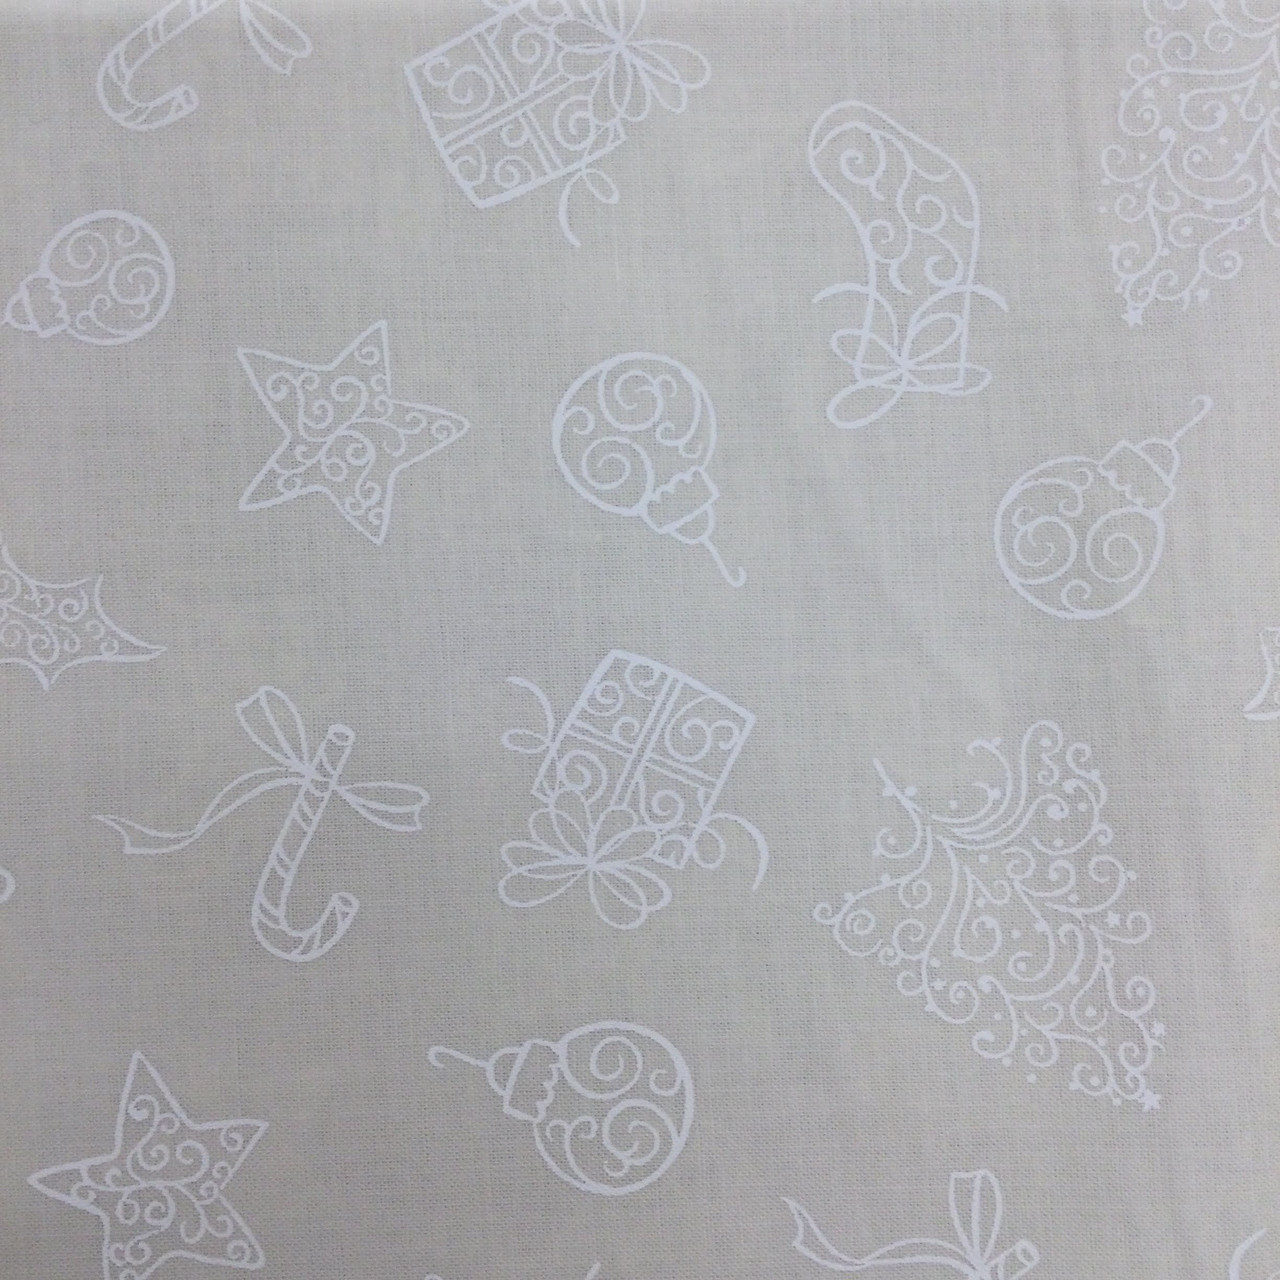  Muslin Fabric Natural 100% Cotton Fabric 60 Wide by